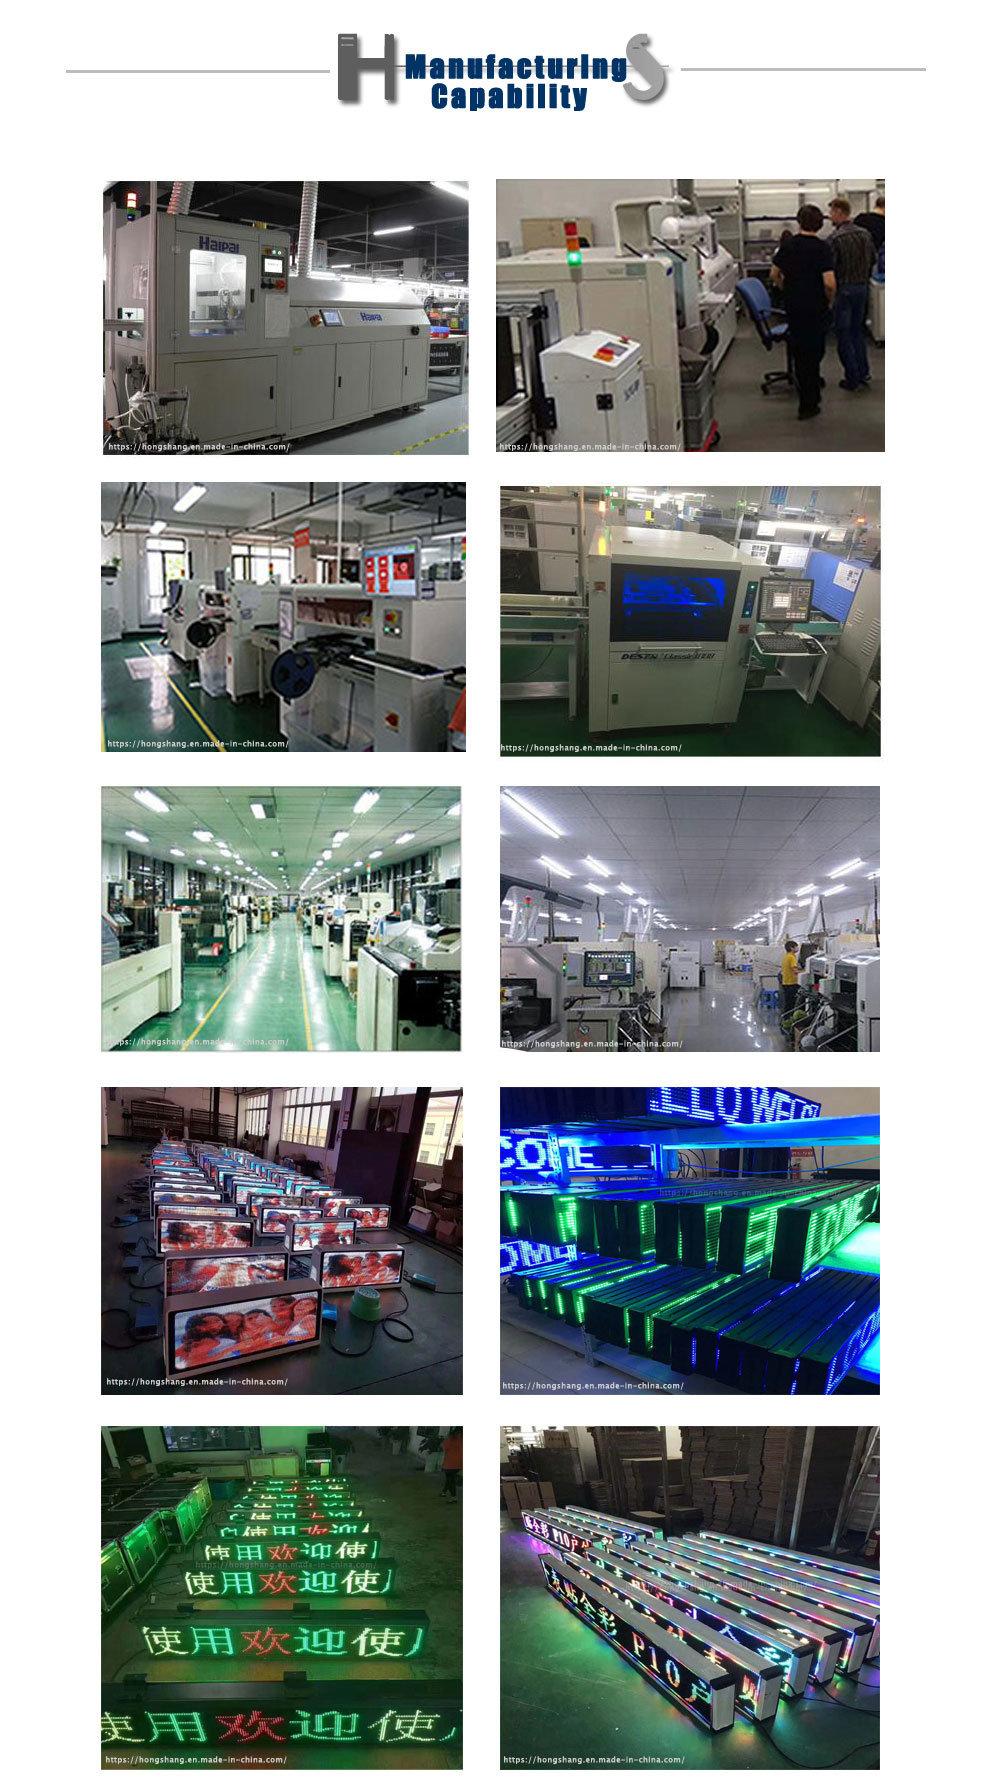 Customized LED Advertising Display Wall, Graphic Digital Panel P10 Module